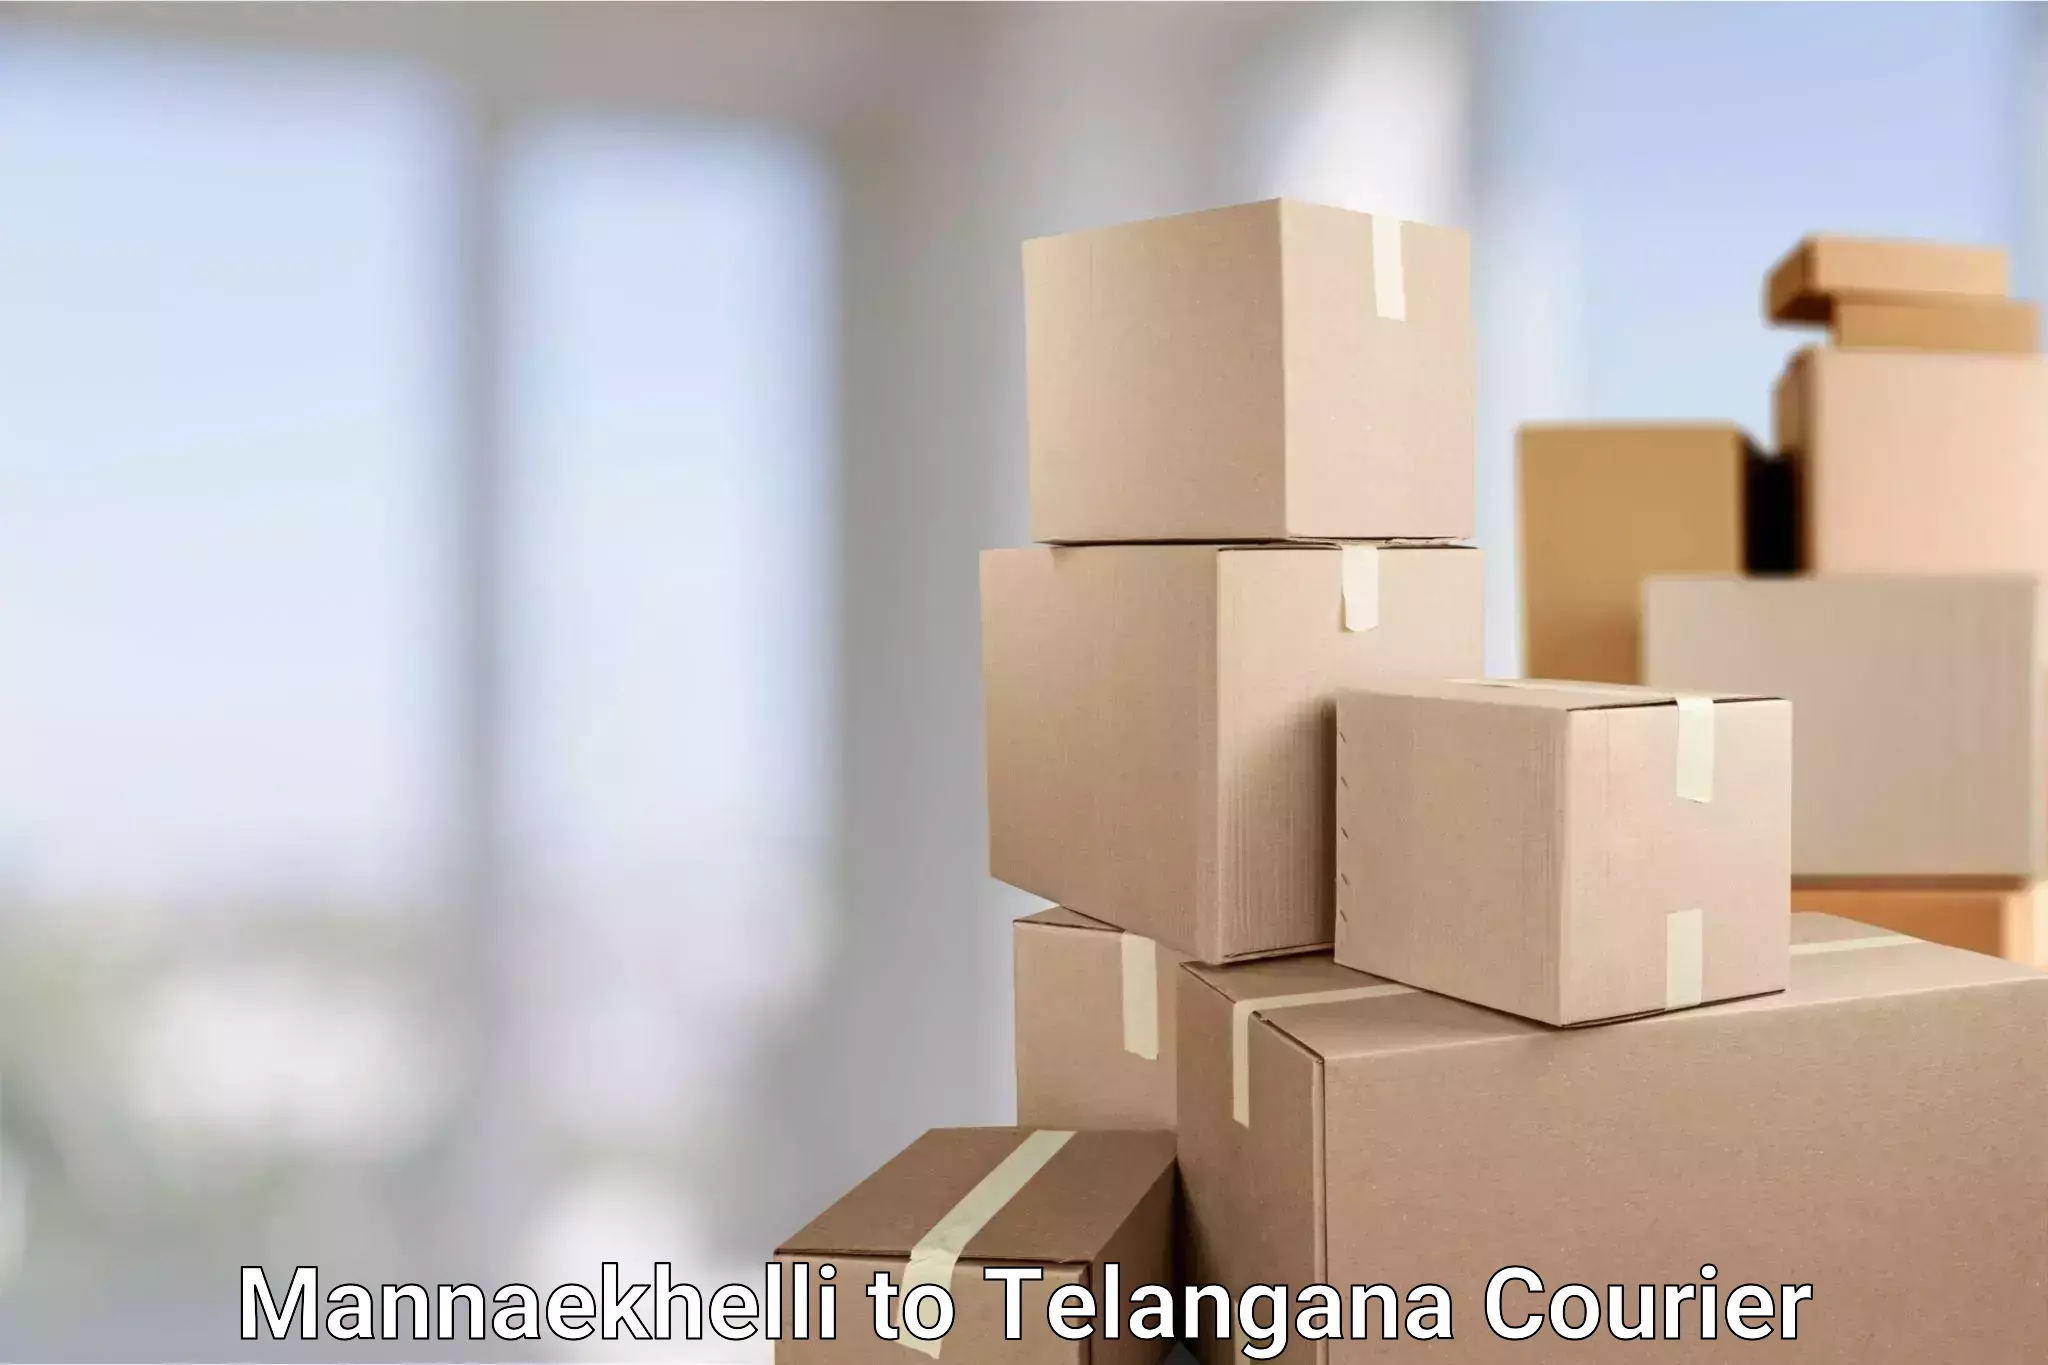 Courier service booking in Mannaekhelli to Allapalli